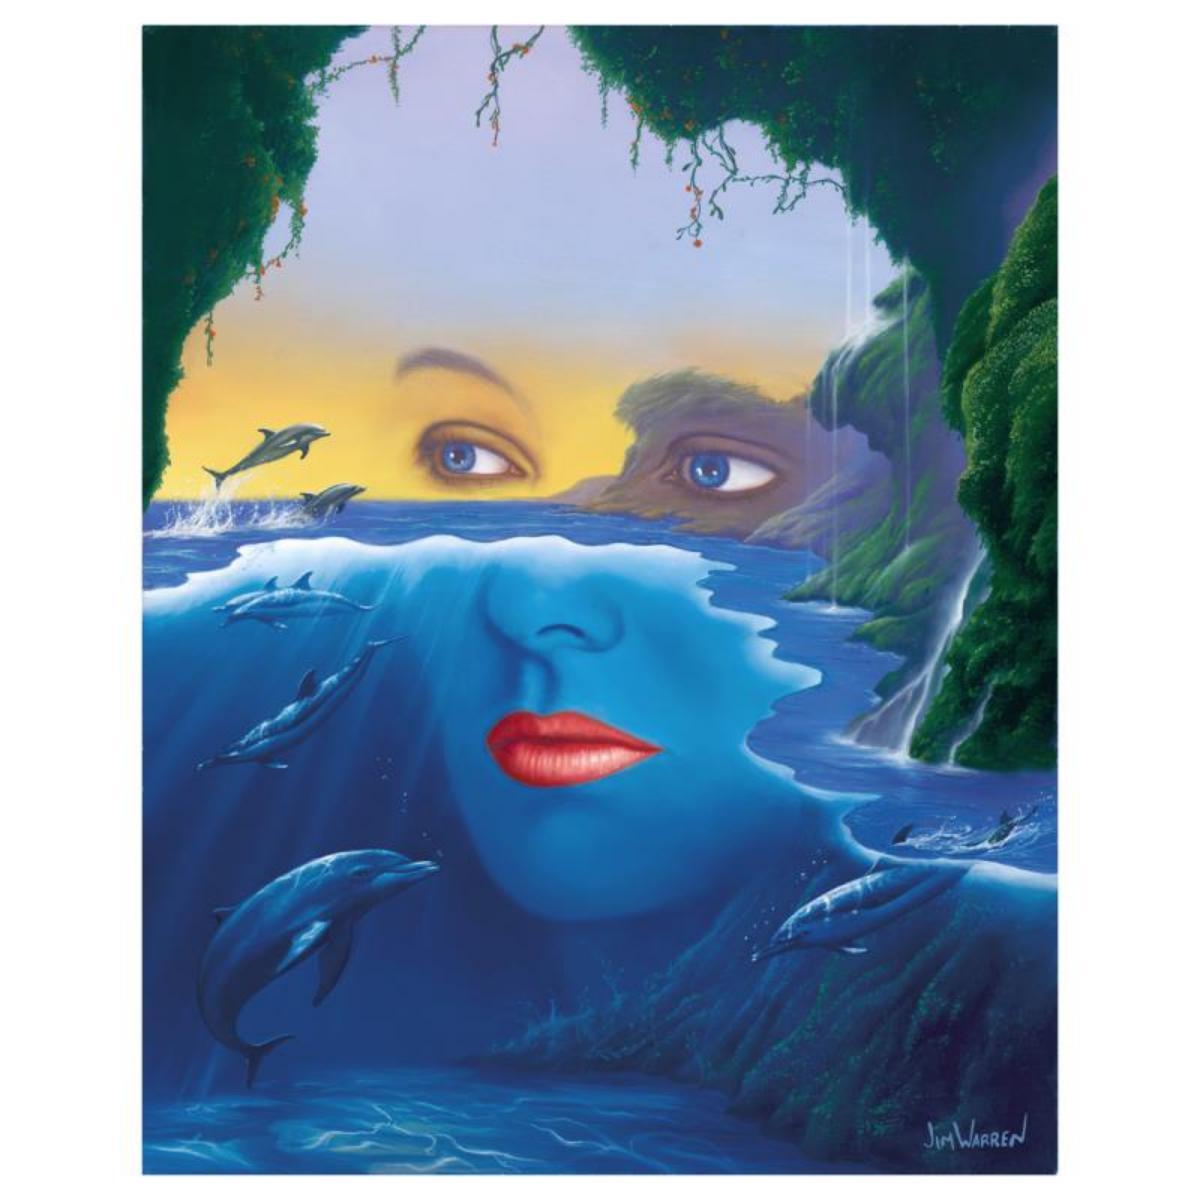 Artwork by Jim Warren, Friends of Mother Nature, Made of Giclee on Canvas